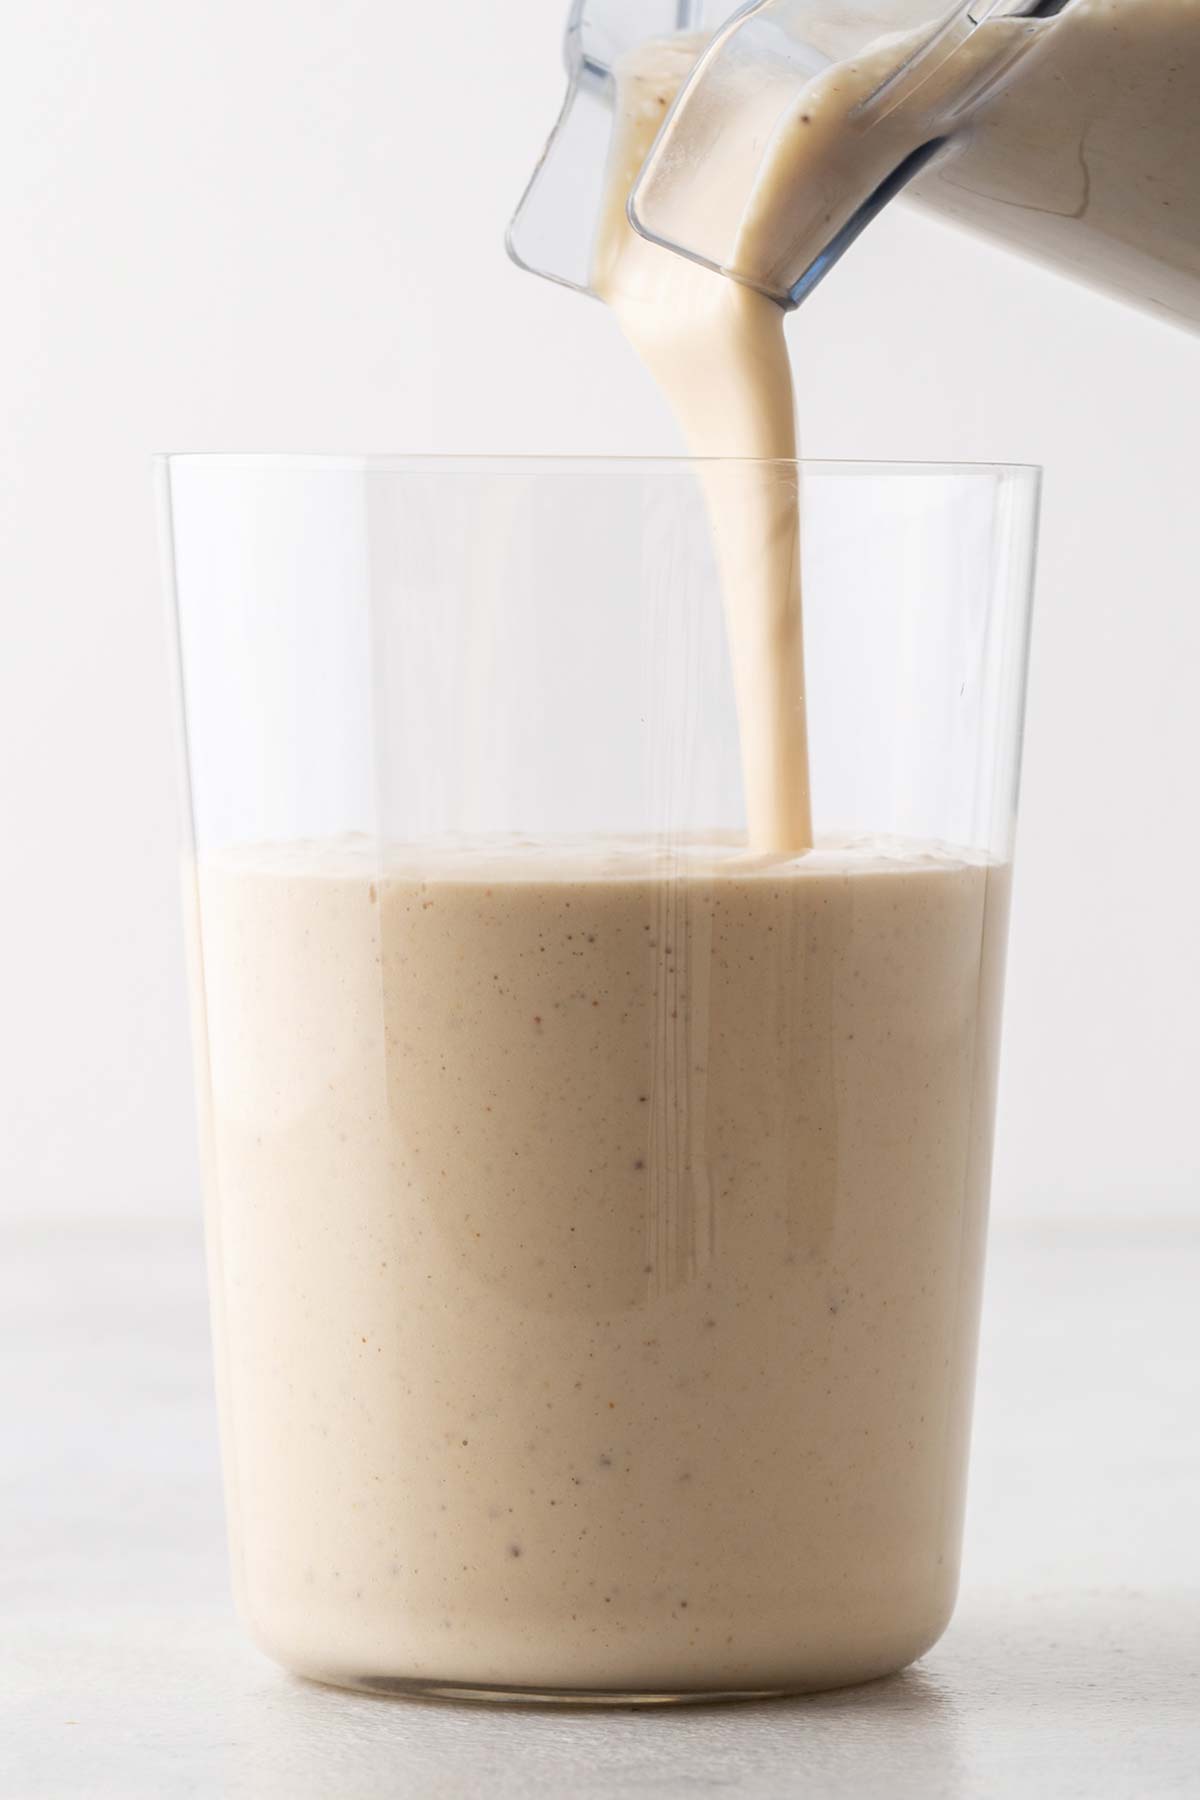 Pouring a peanut butter banana smoothie in a glass.